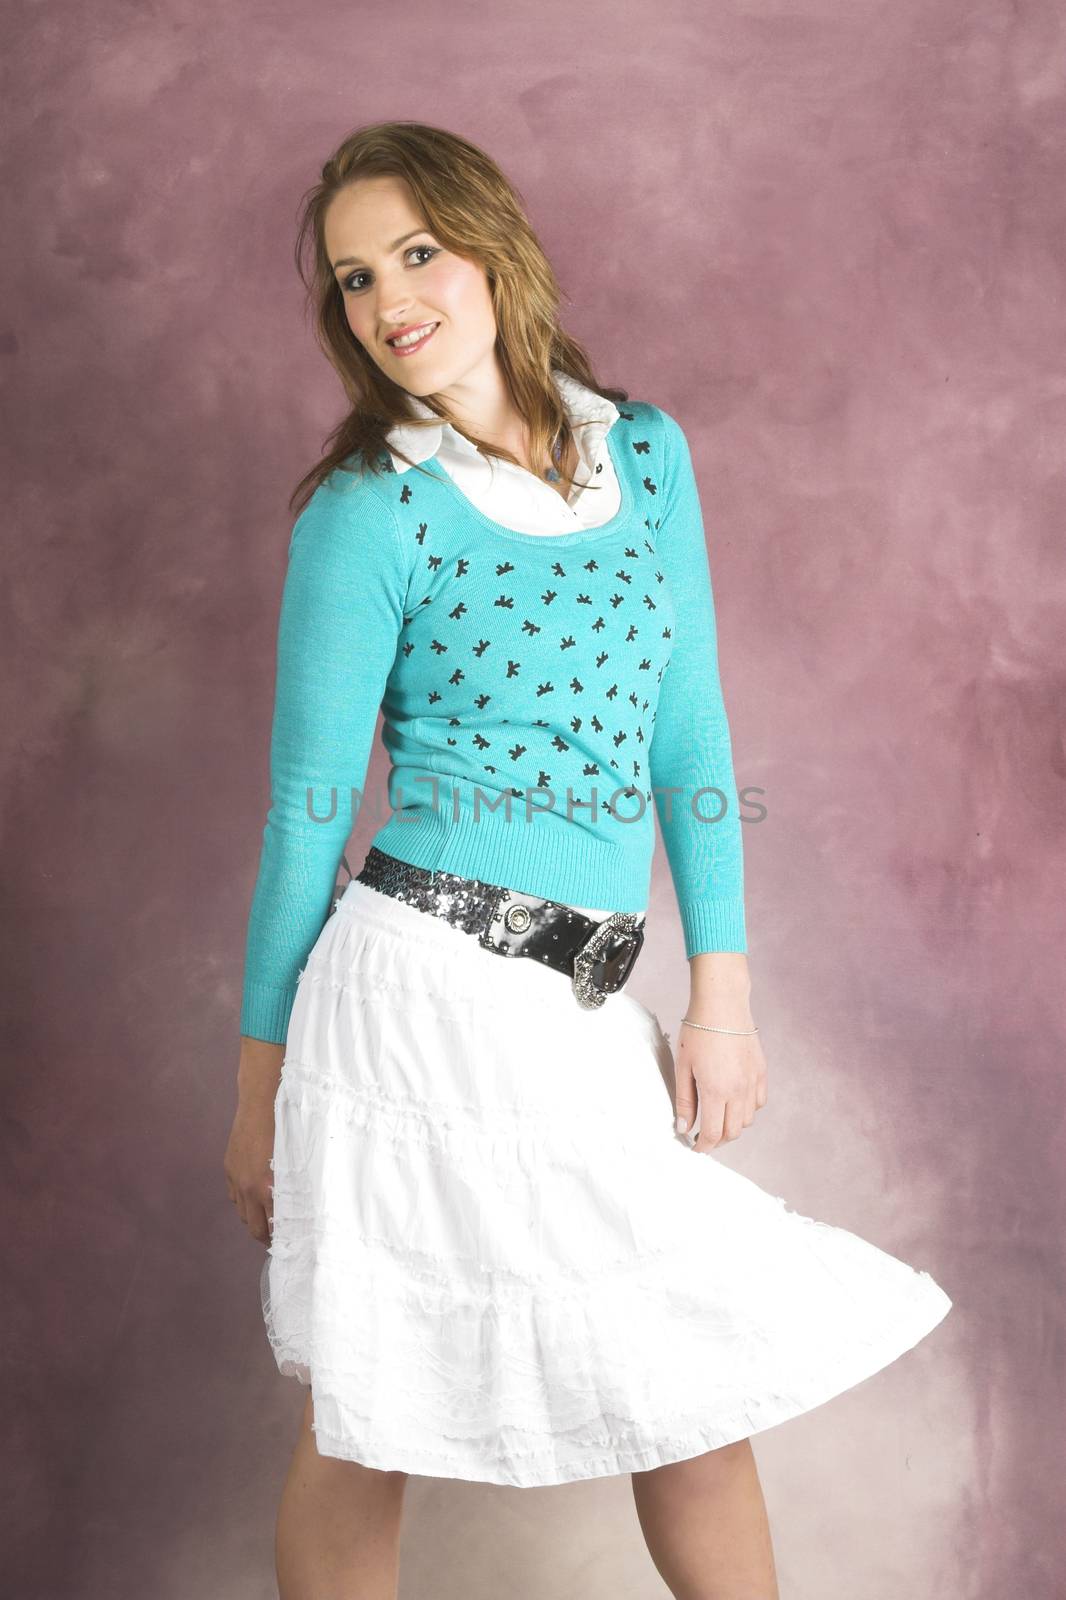 Beautiful young female wearing a white skirt and blue top